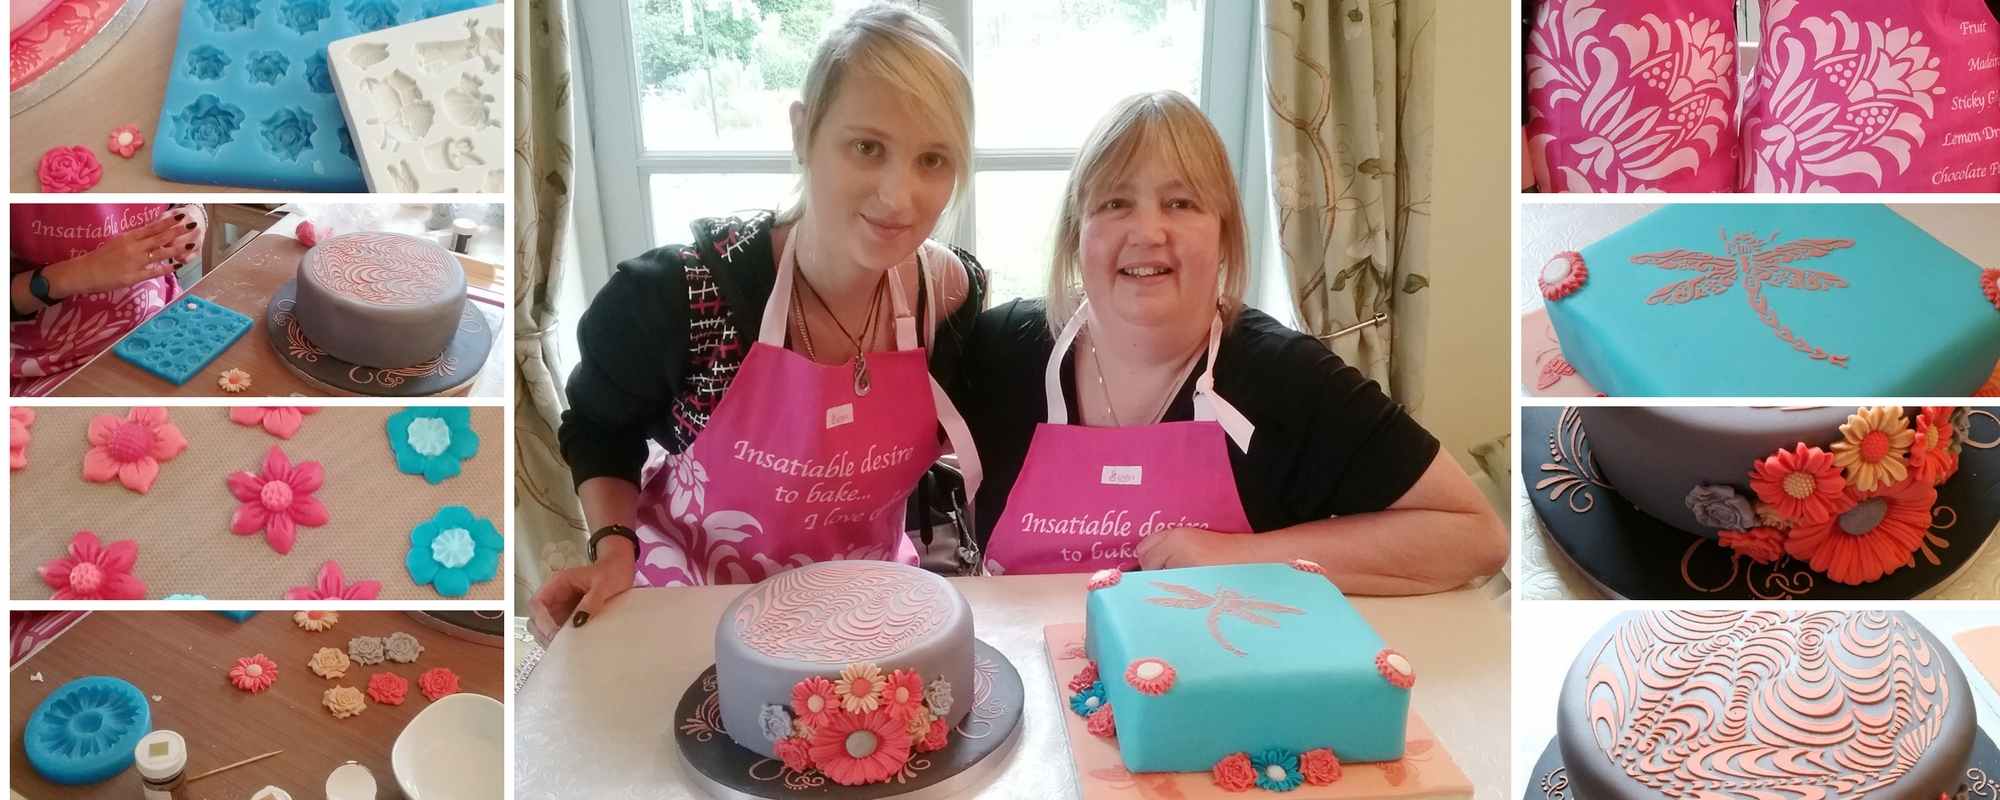 mum and daughter class with Lindy Smith - learning to cover a cake with a professional finish